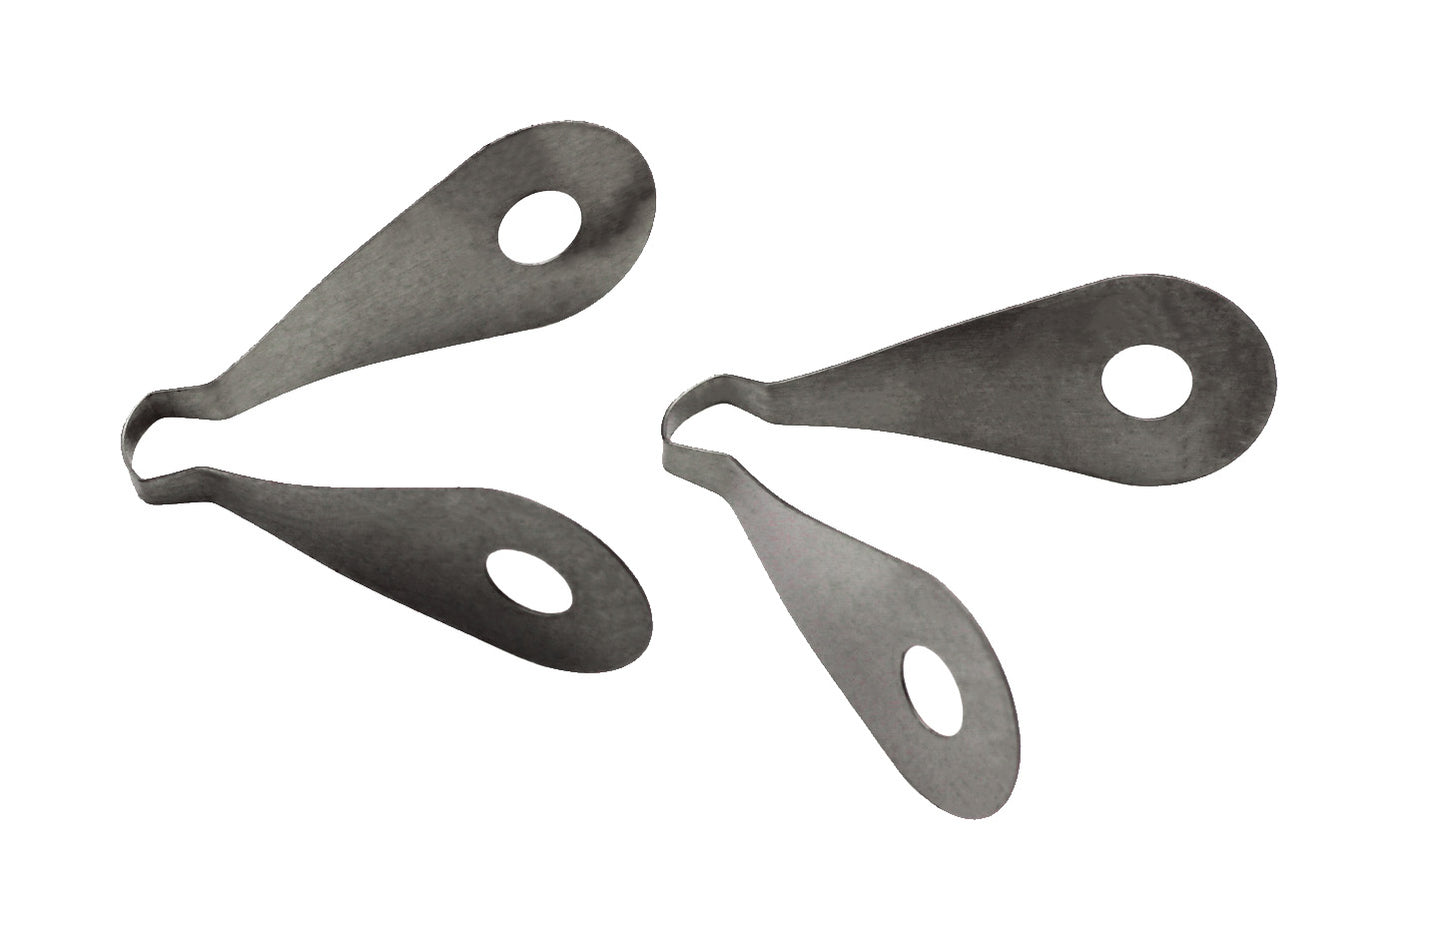 DiamondCore Tools - Extra 'FP' Series Fine Point Carving Tool Blades - Set of 2 (Various Blades)